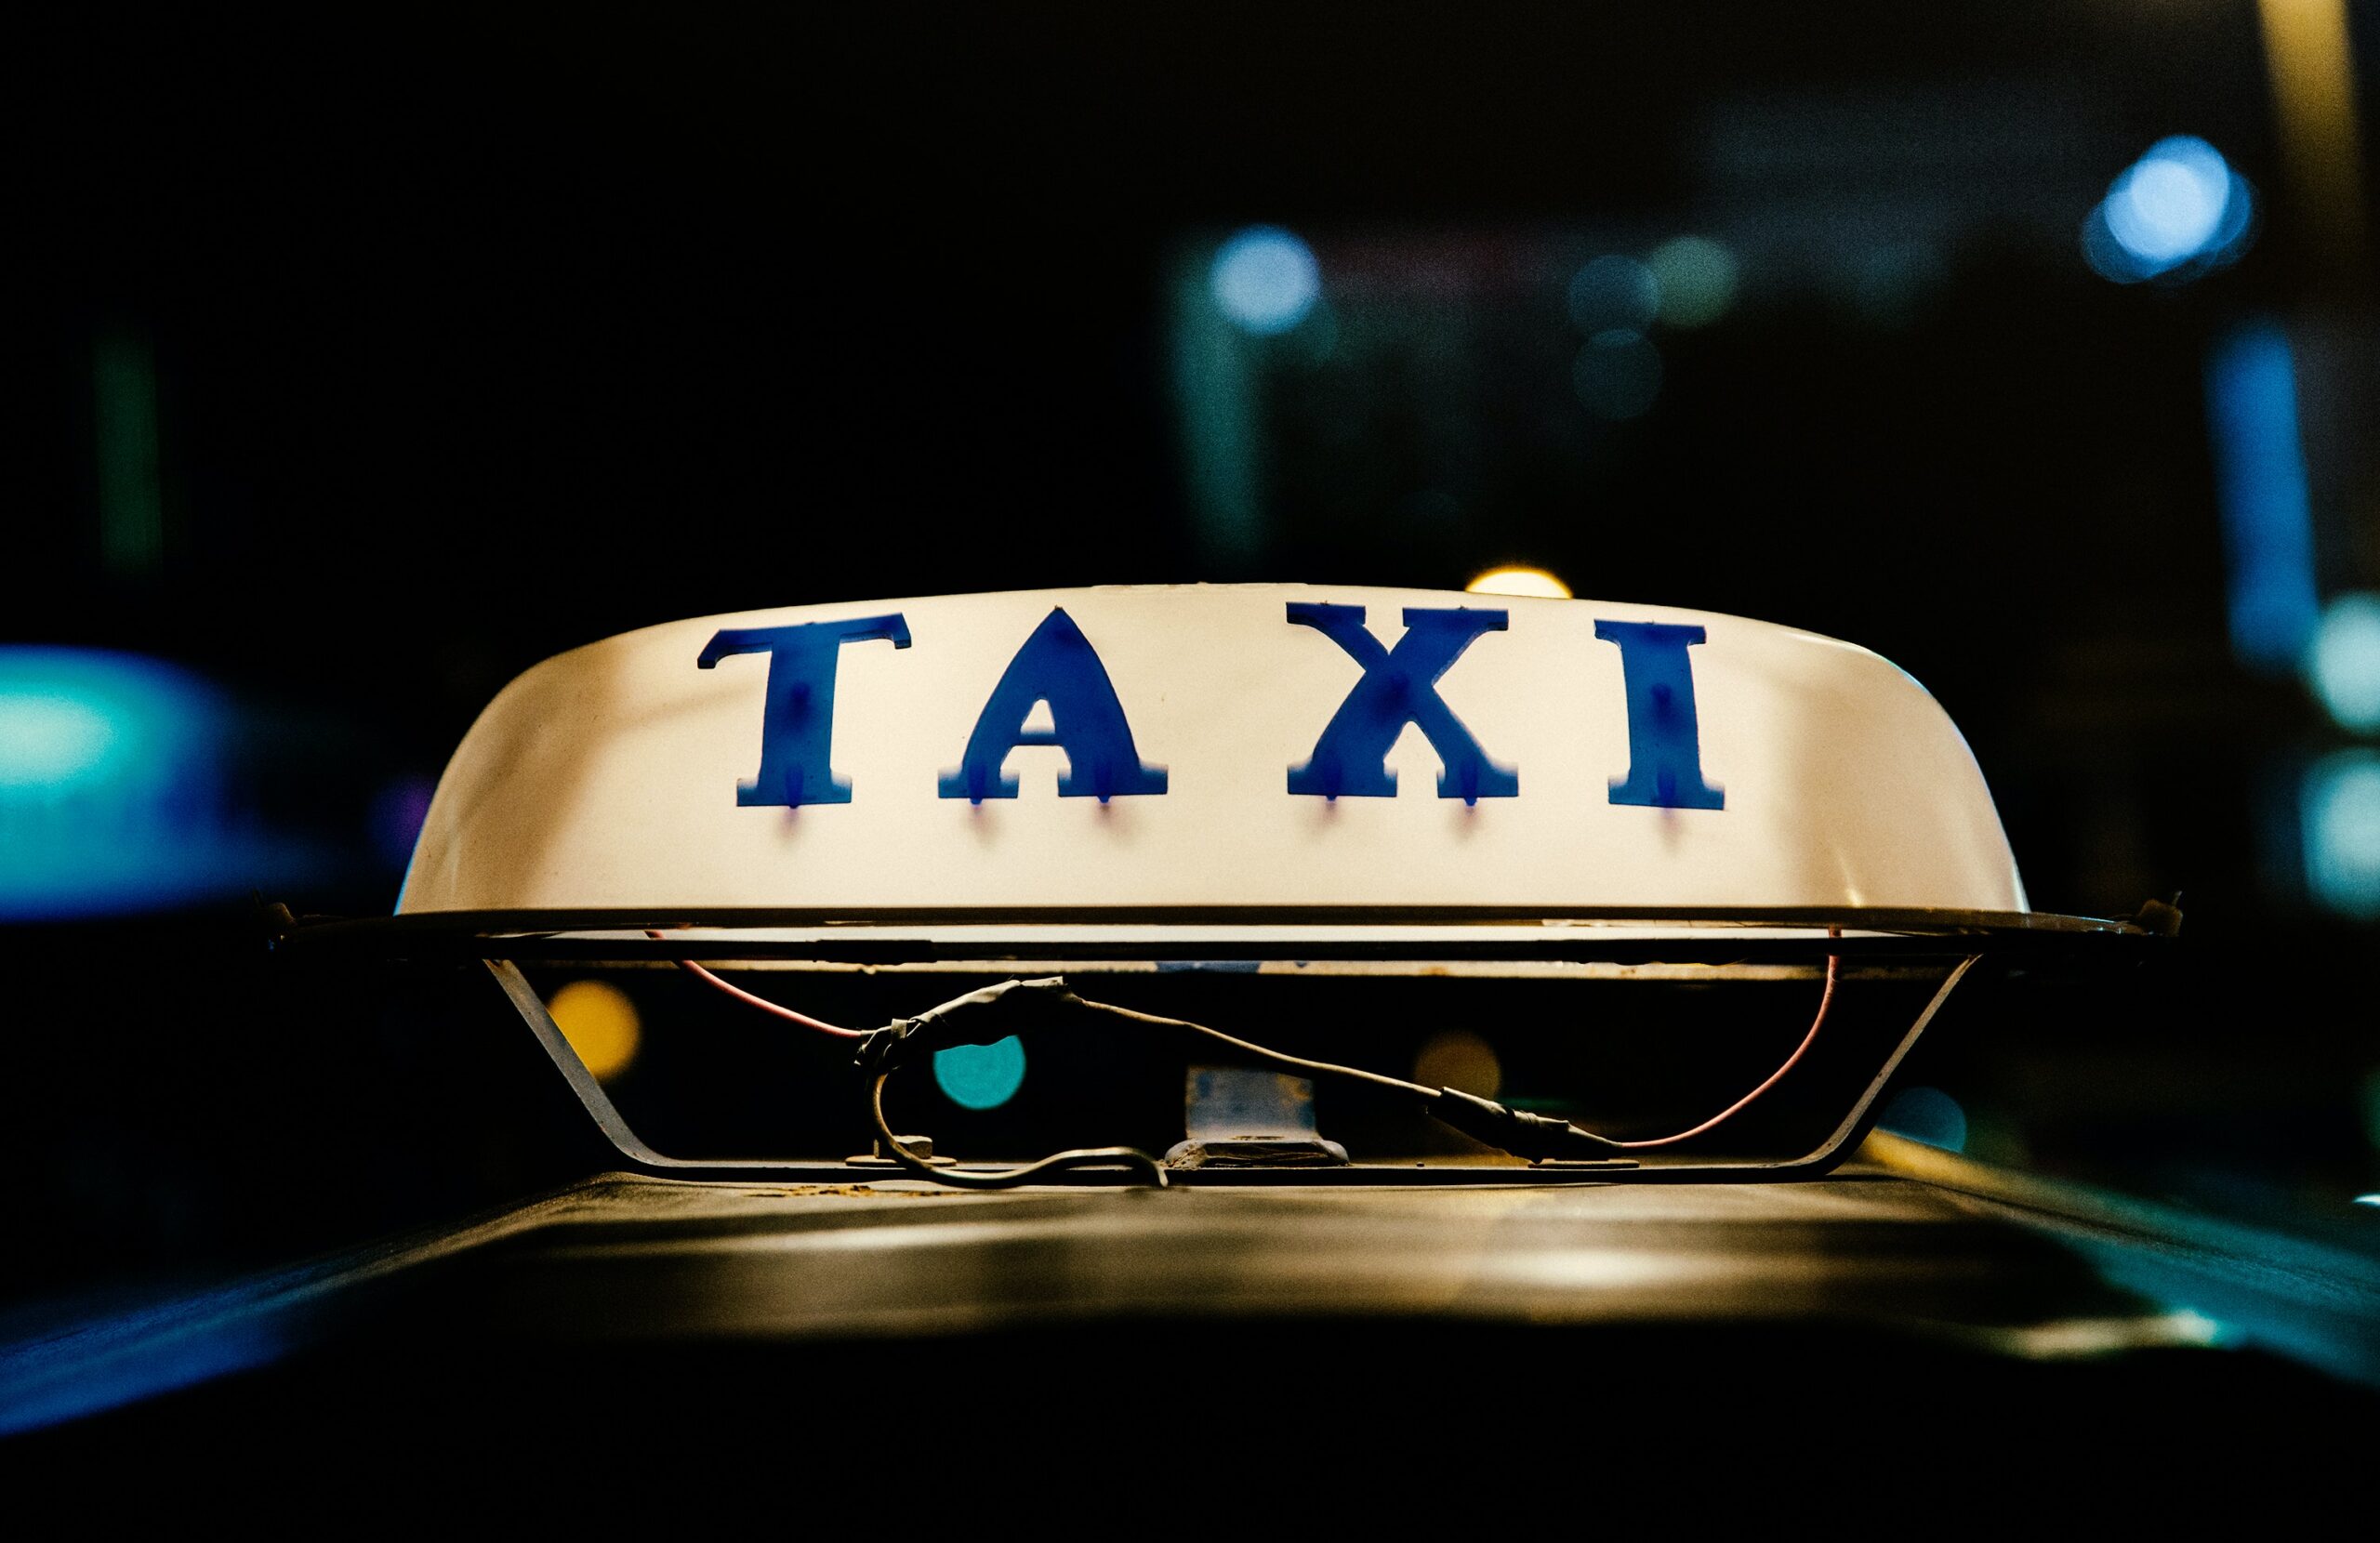 Taxi roof sign